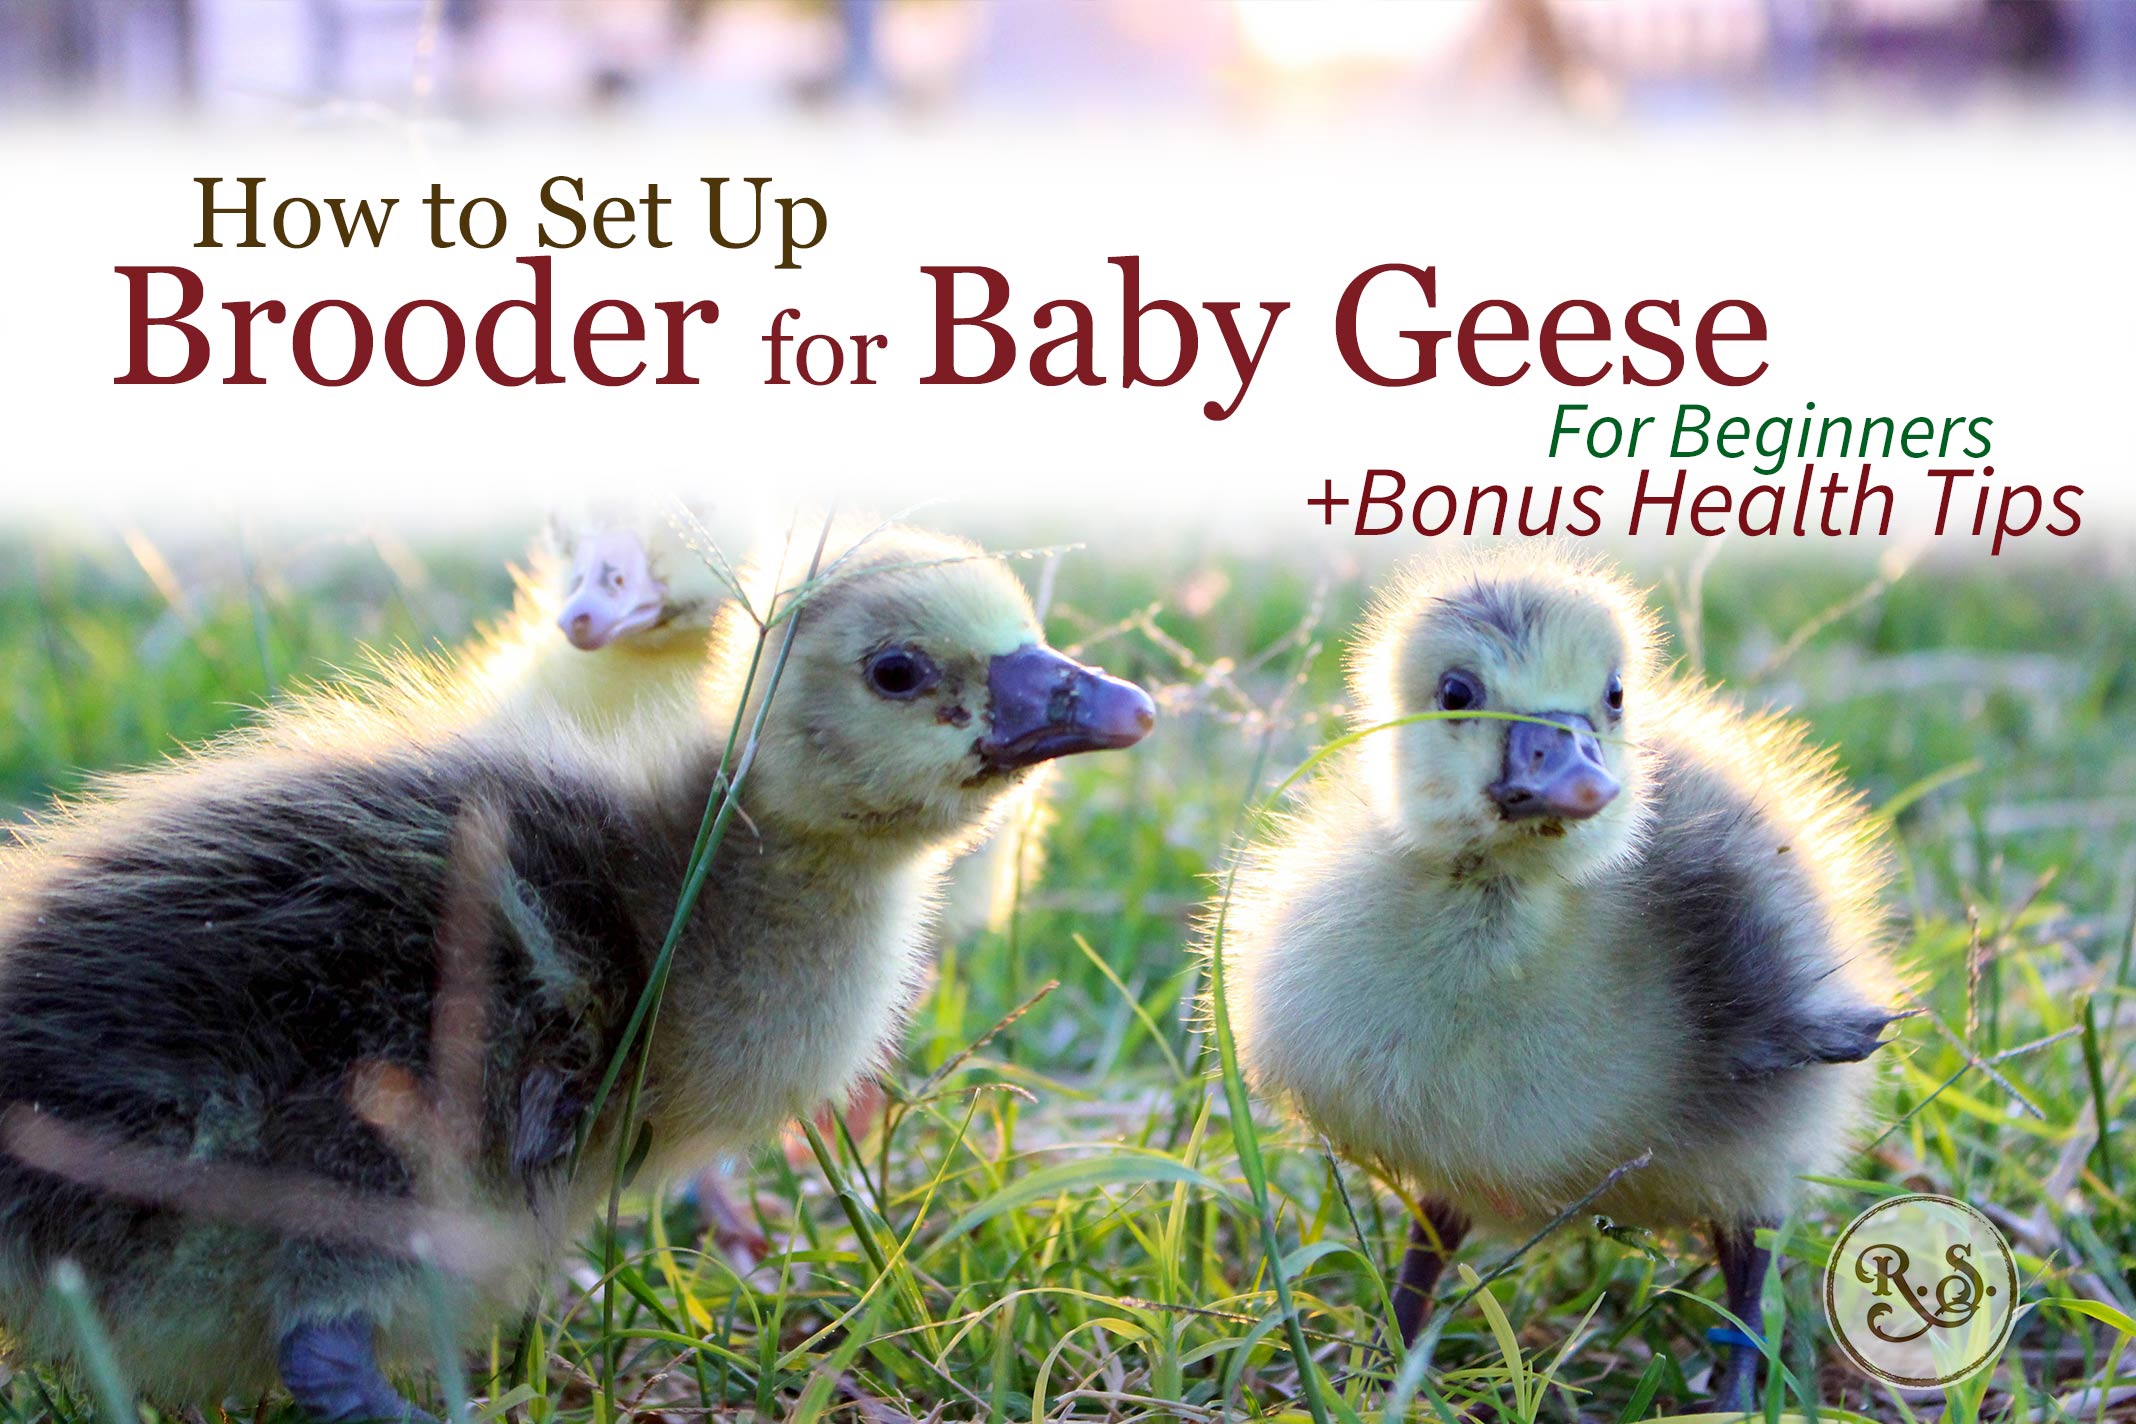 Raising geese starts with baby goslings. Learn how to set up a brooder and get your geese off to a healthy start—for beginners.